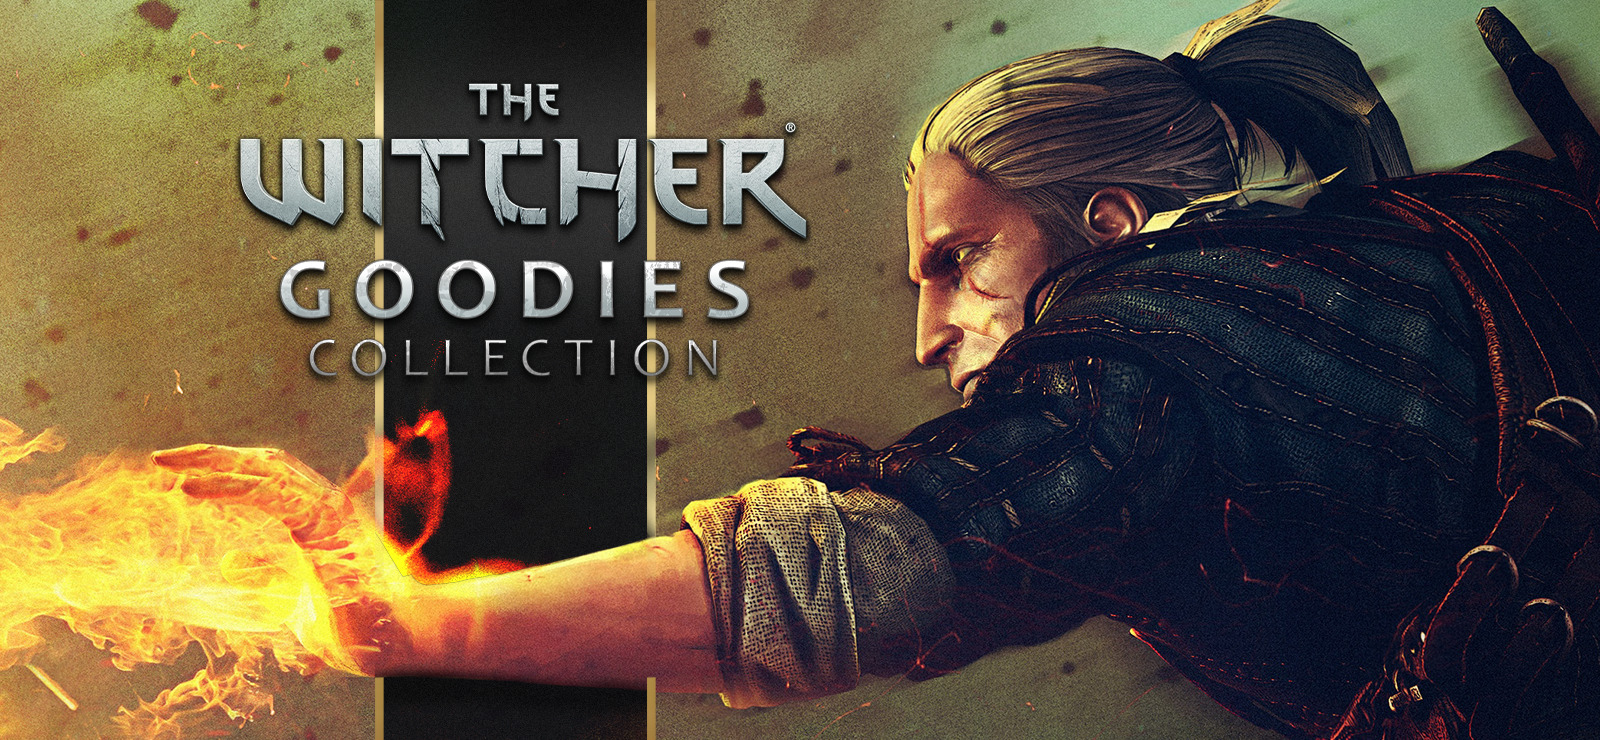 The Witcher - Goodies Collection GOG CD Key, $2.54